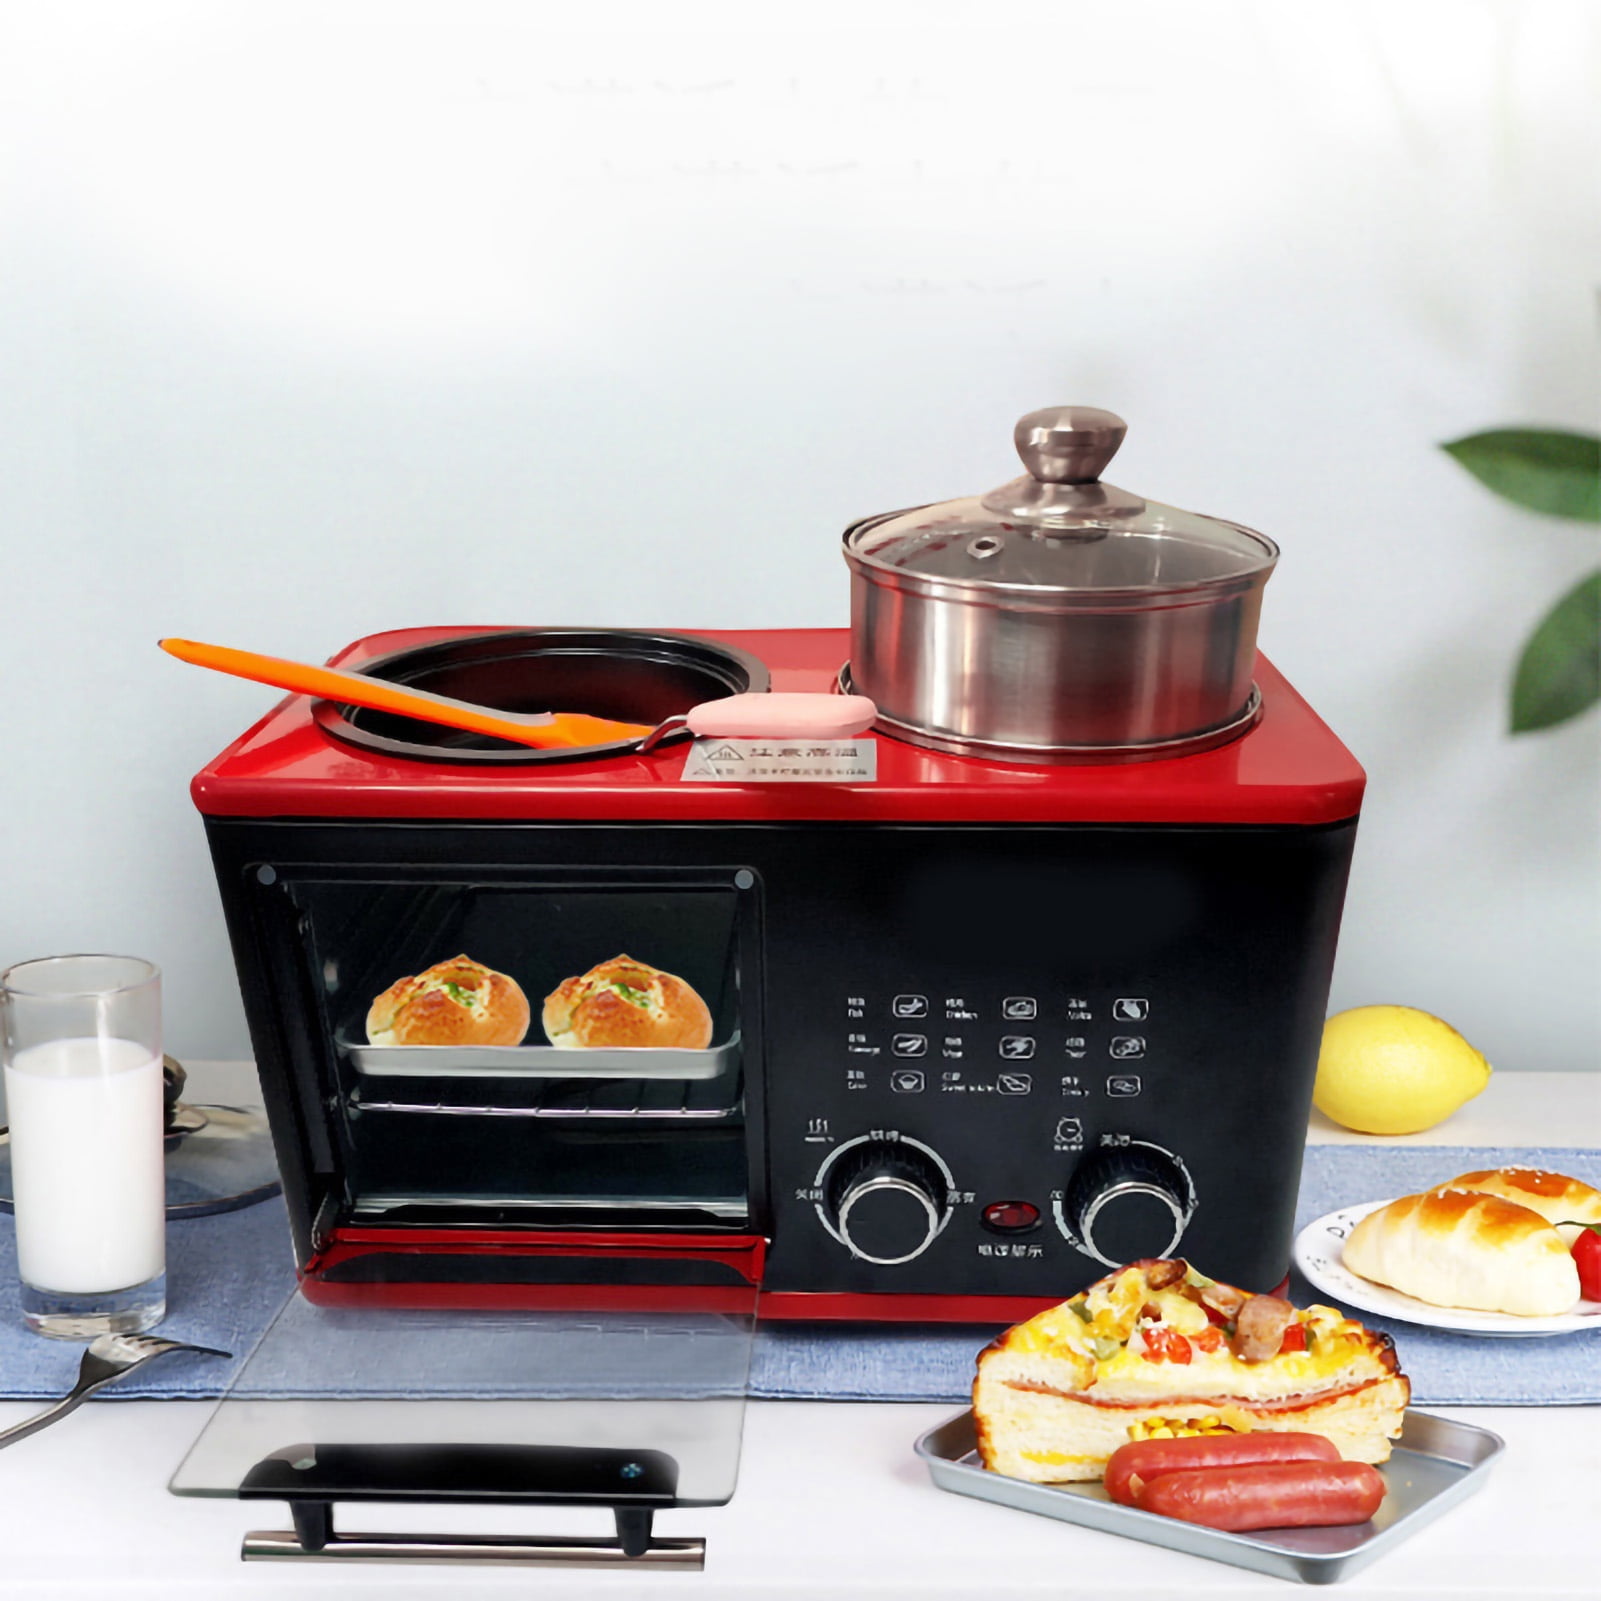 Station, Toaster with Frying Pan, Portable Oven Breakfast Maker